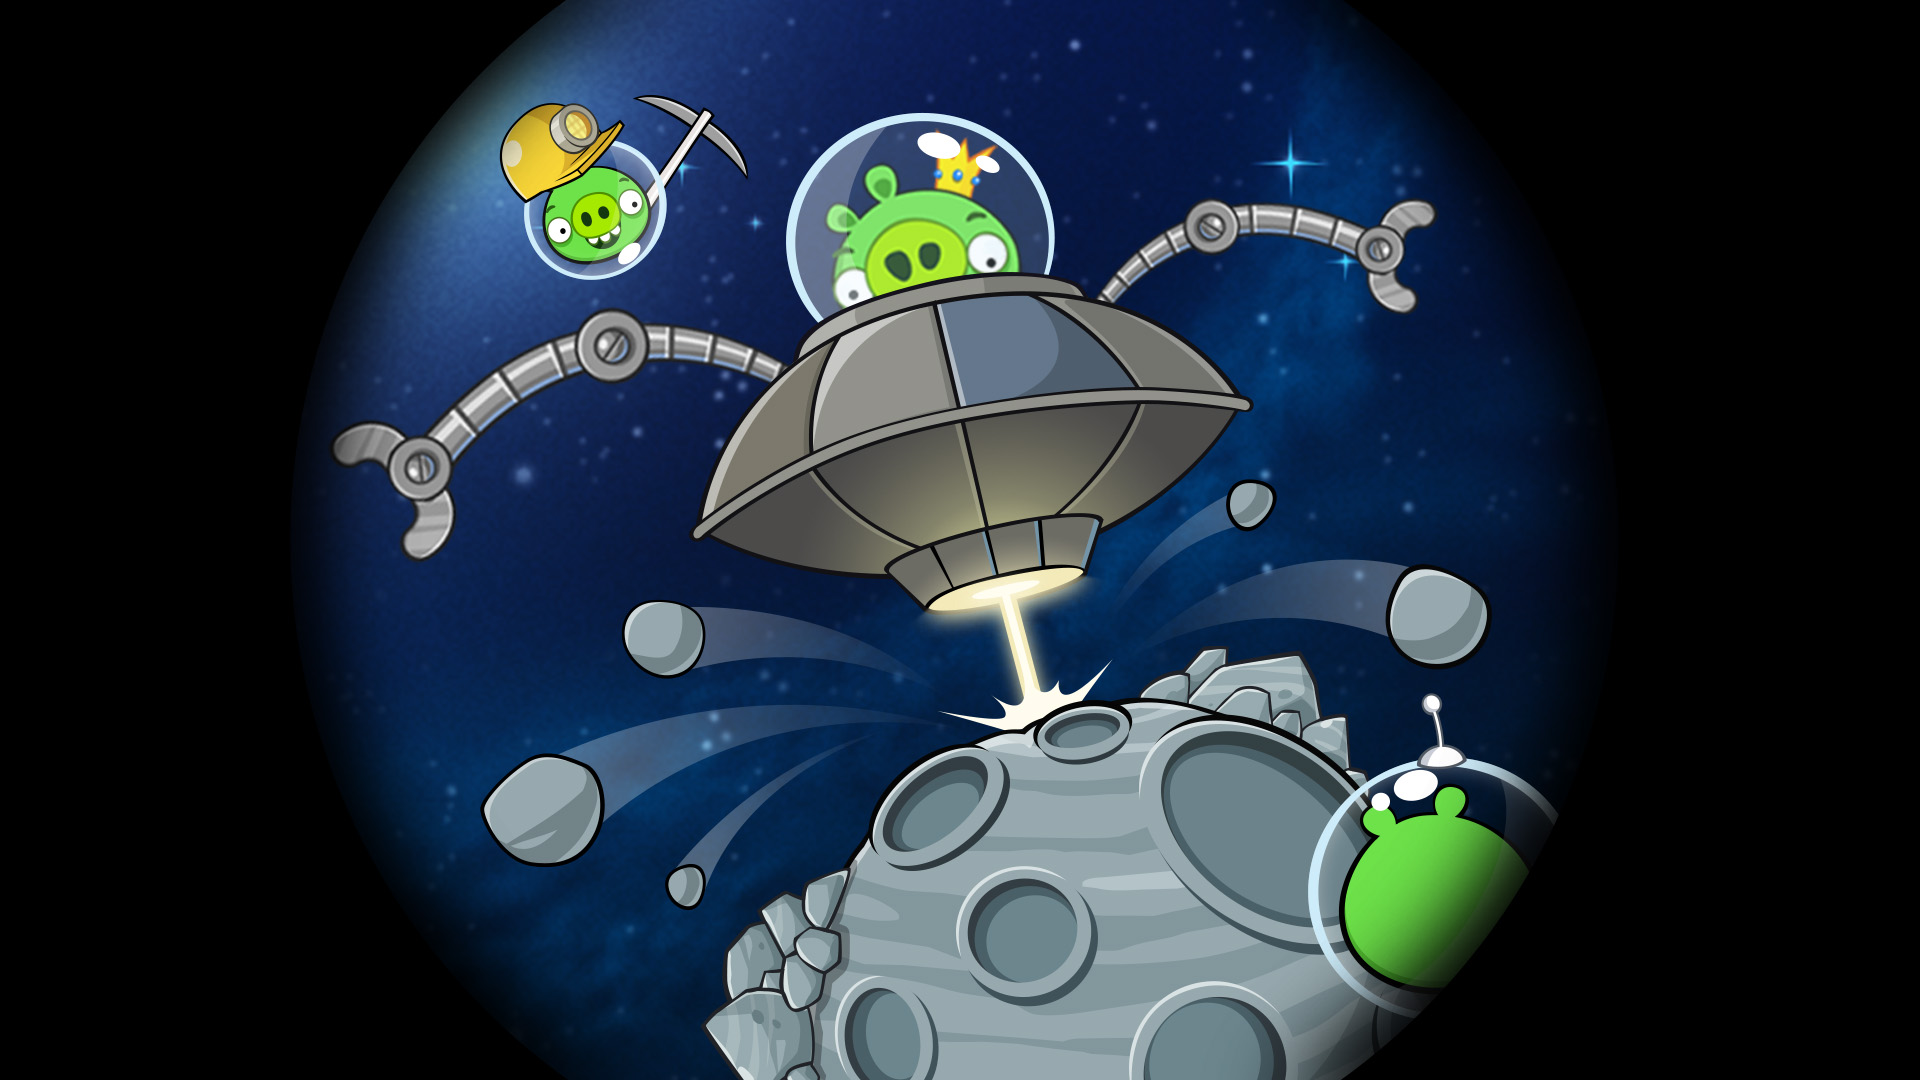 Angry Birds Space Appid 210550 Steamdb